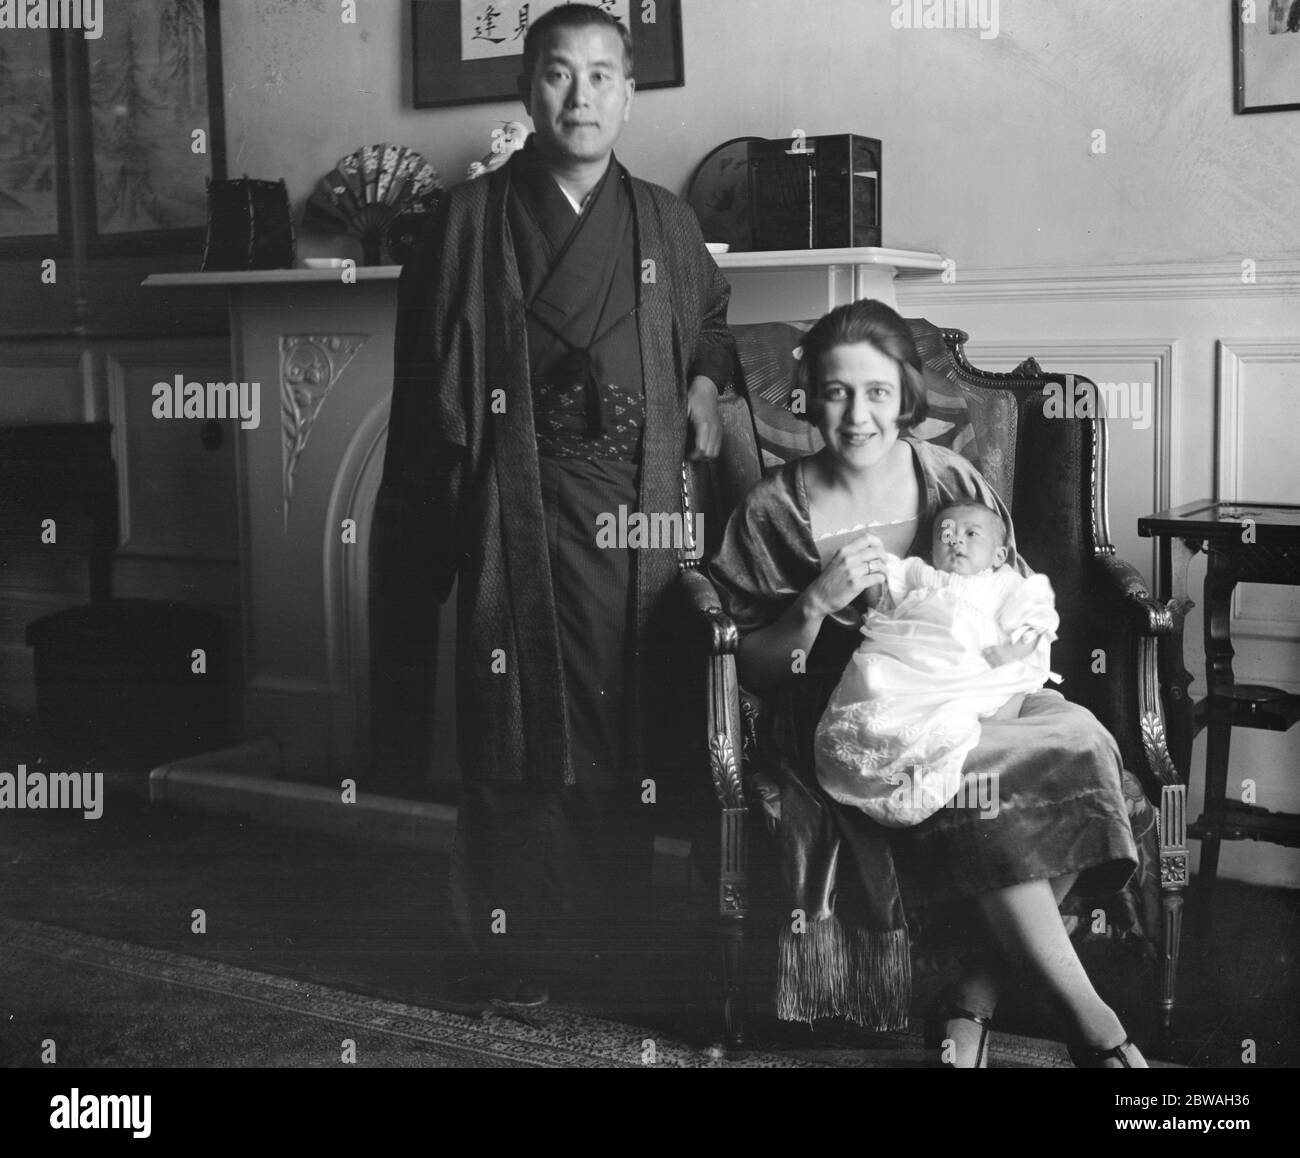 Japanese Poet ' s English Bride Mr Gonnoske Komai , with his wife and baby 29 December 1921 Miss Mary Norah Howard Morgan , of Sheffield , who under the name of Norah Howard was a dancer in Chu Chin Chow Stock Photo